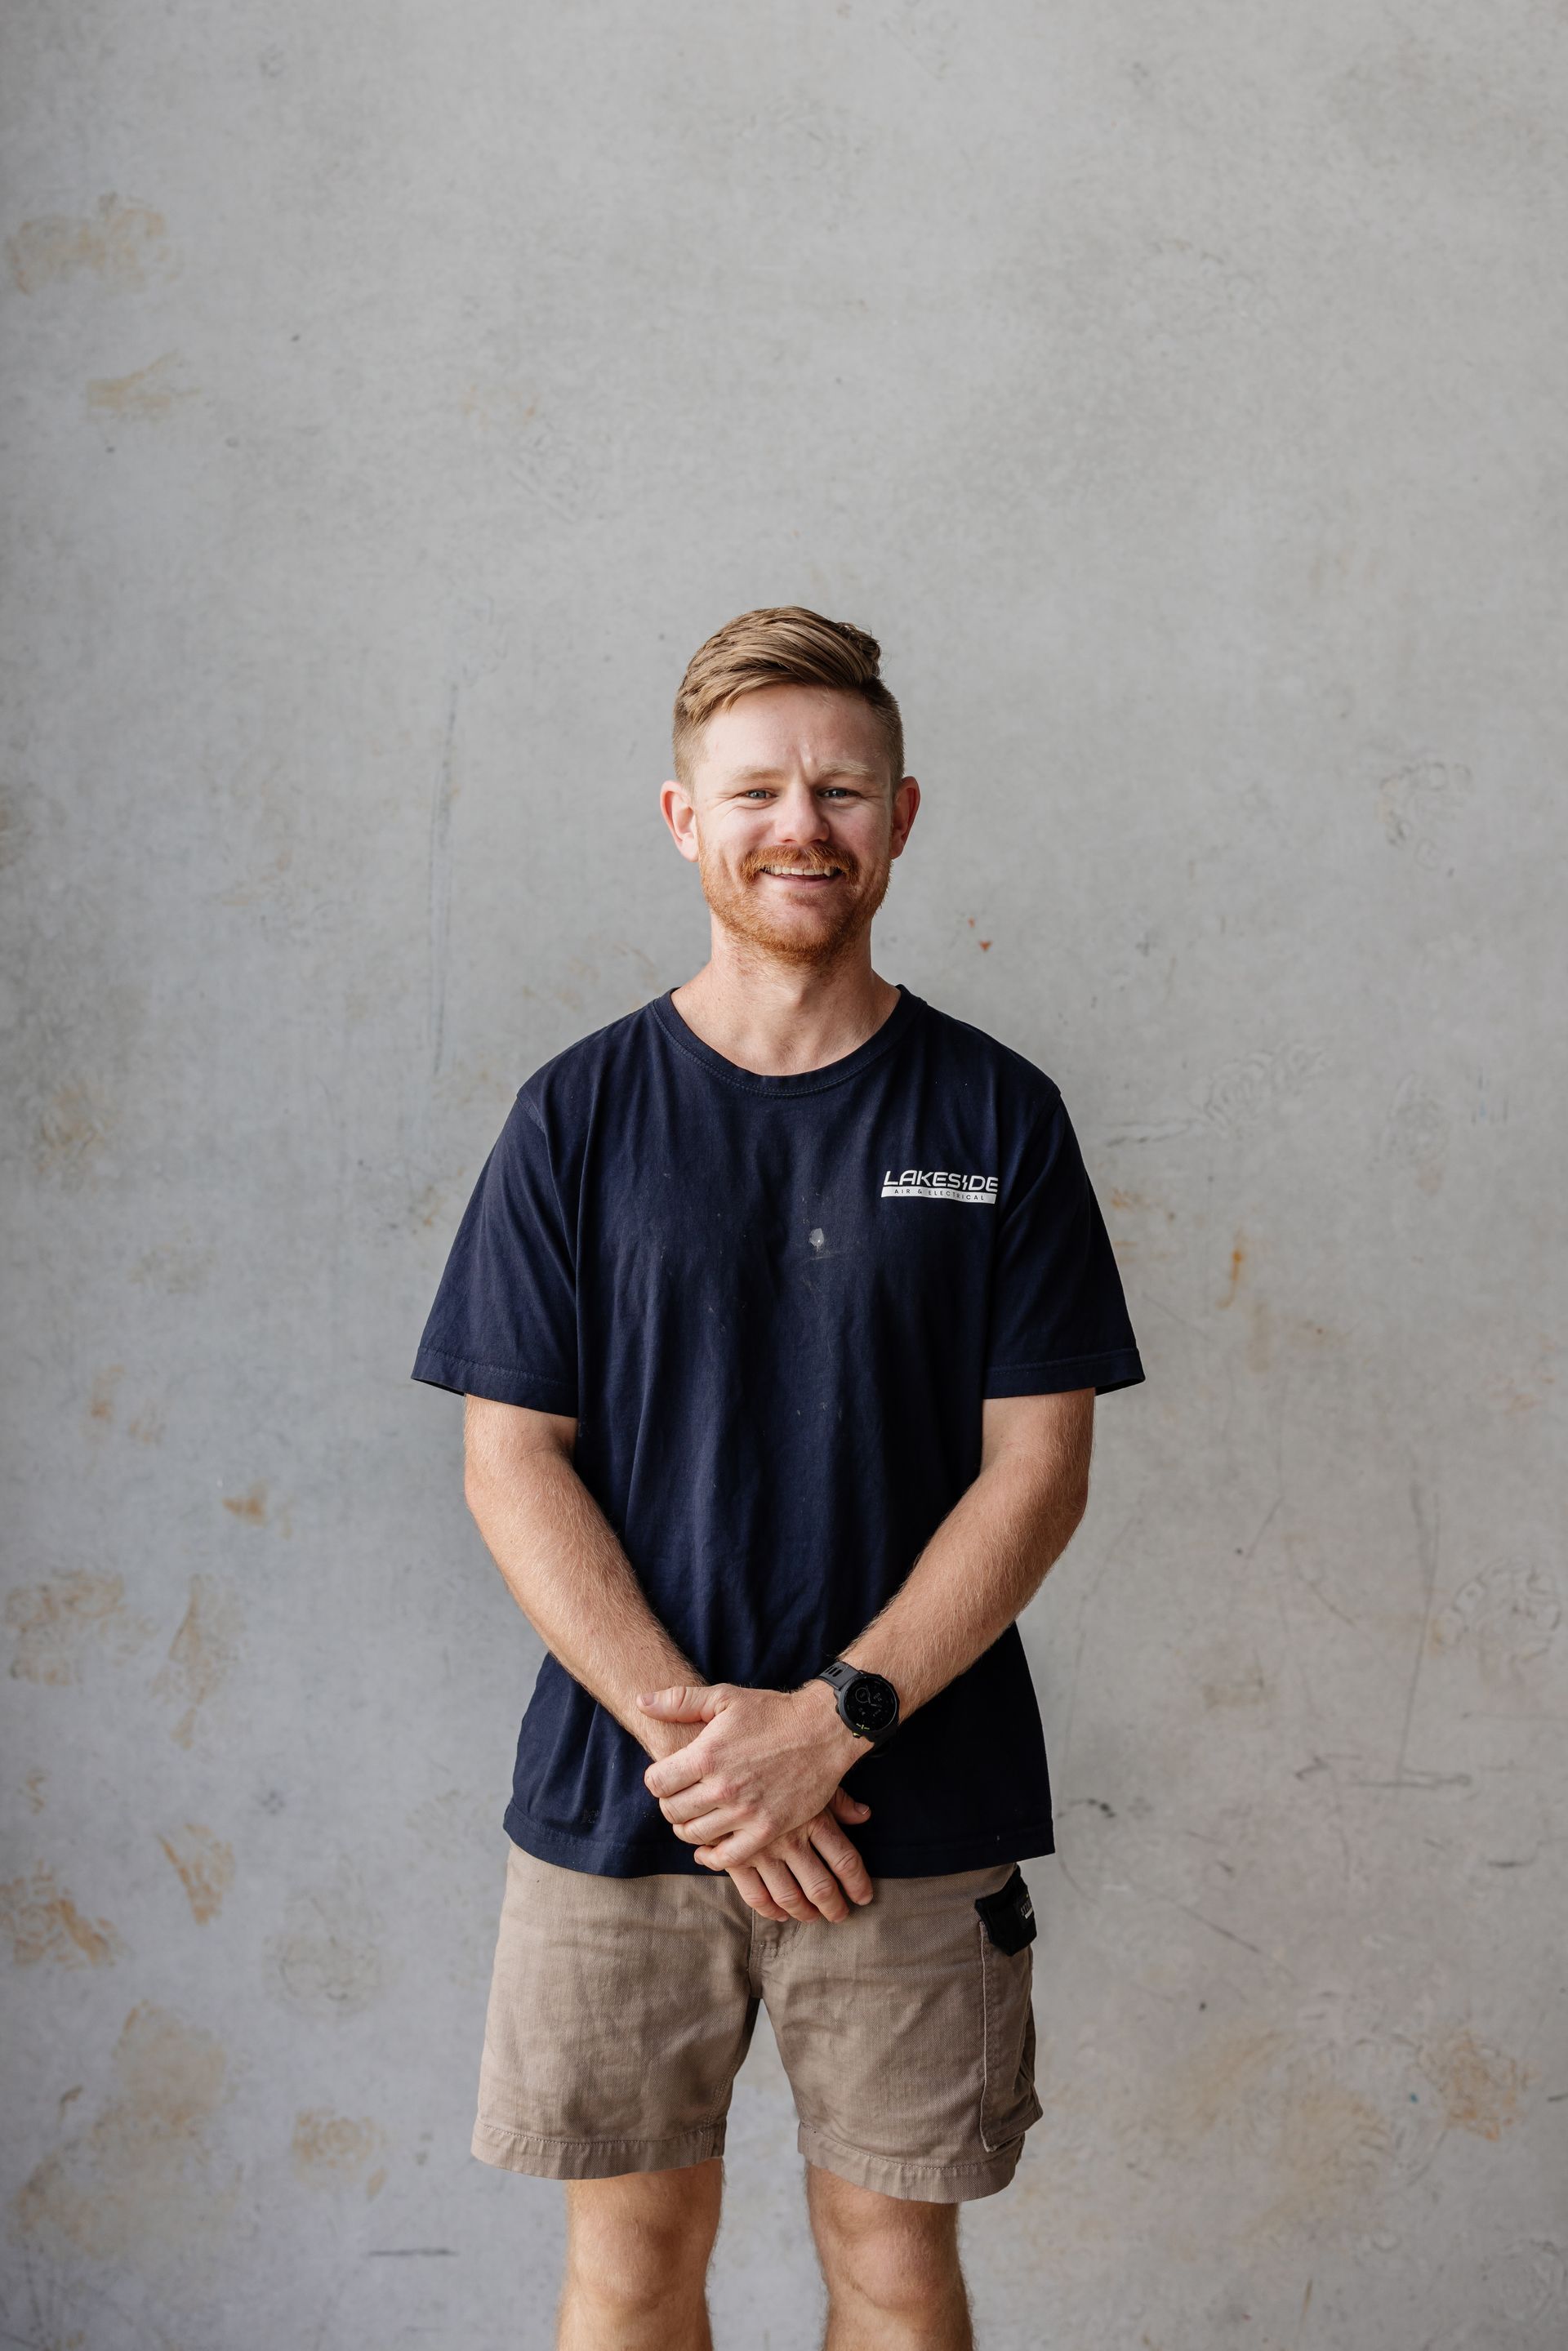 Grant, senior Tradesman for Lakeside Air & Electrical. Specialising in Air Conditioning and Electrical services in Lake Macquarie and Newcastle.